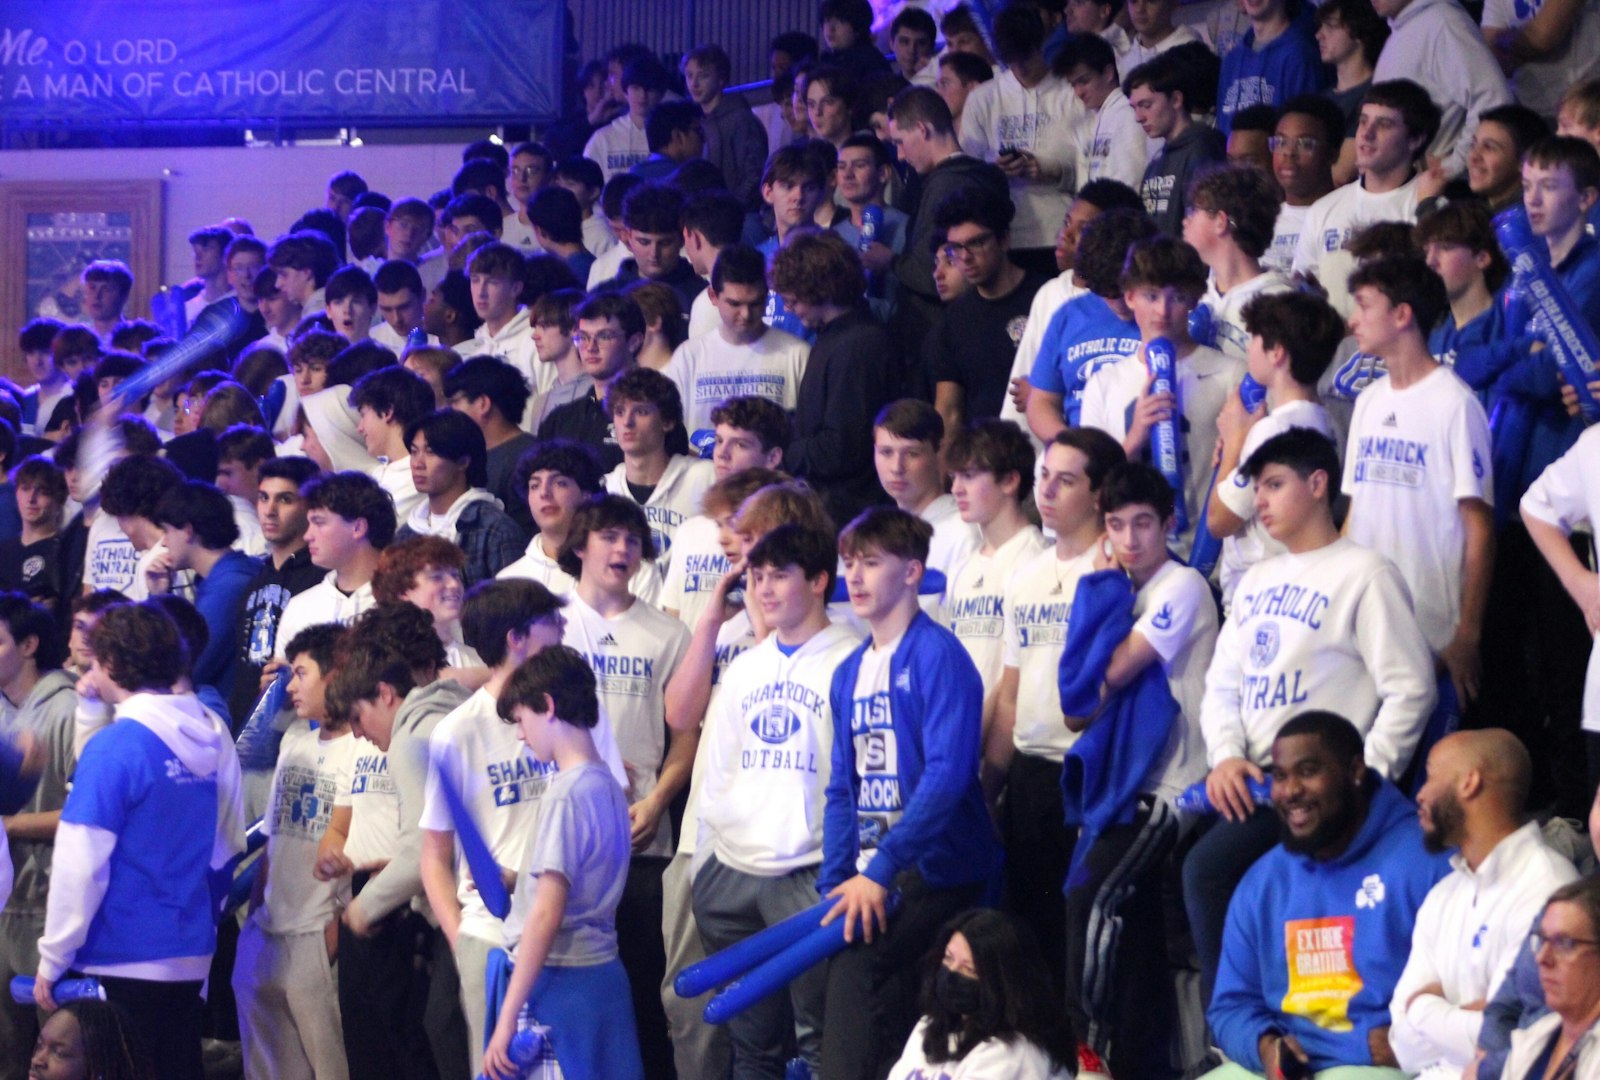 Holding the “assembly dual” during the school day enabled the Catholic Central gym to be packed to the rafters with a partisan crowd of students.